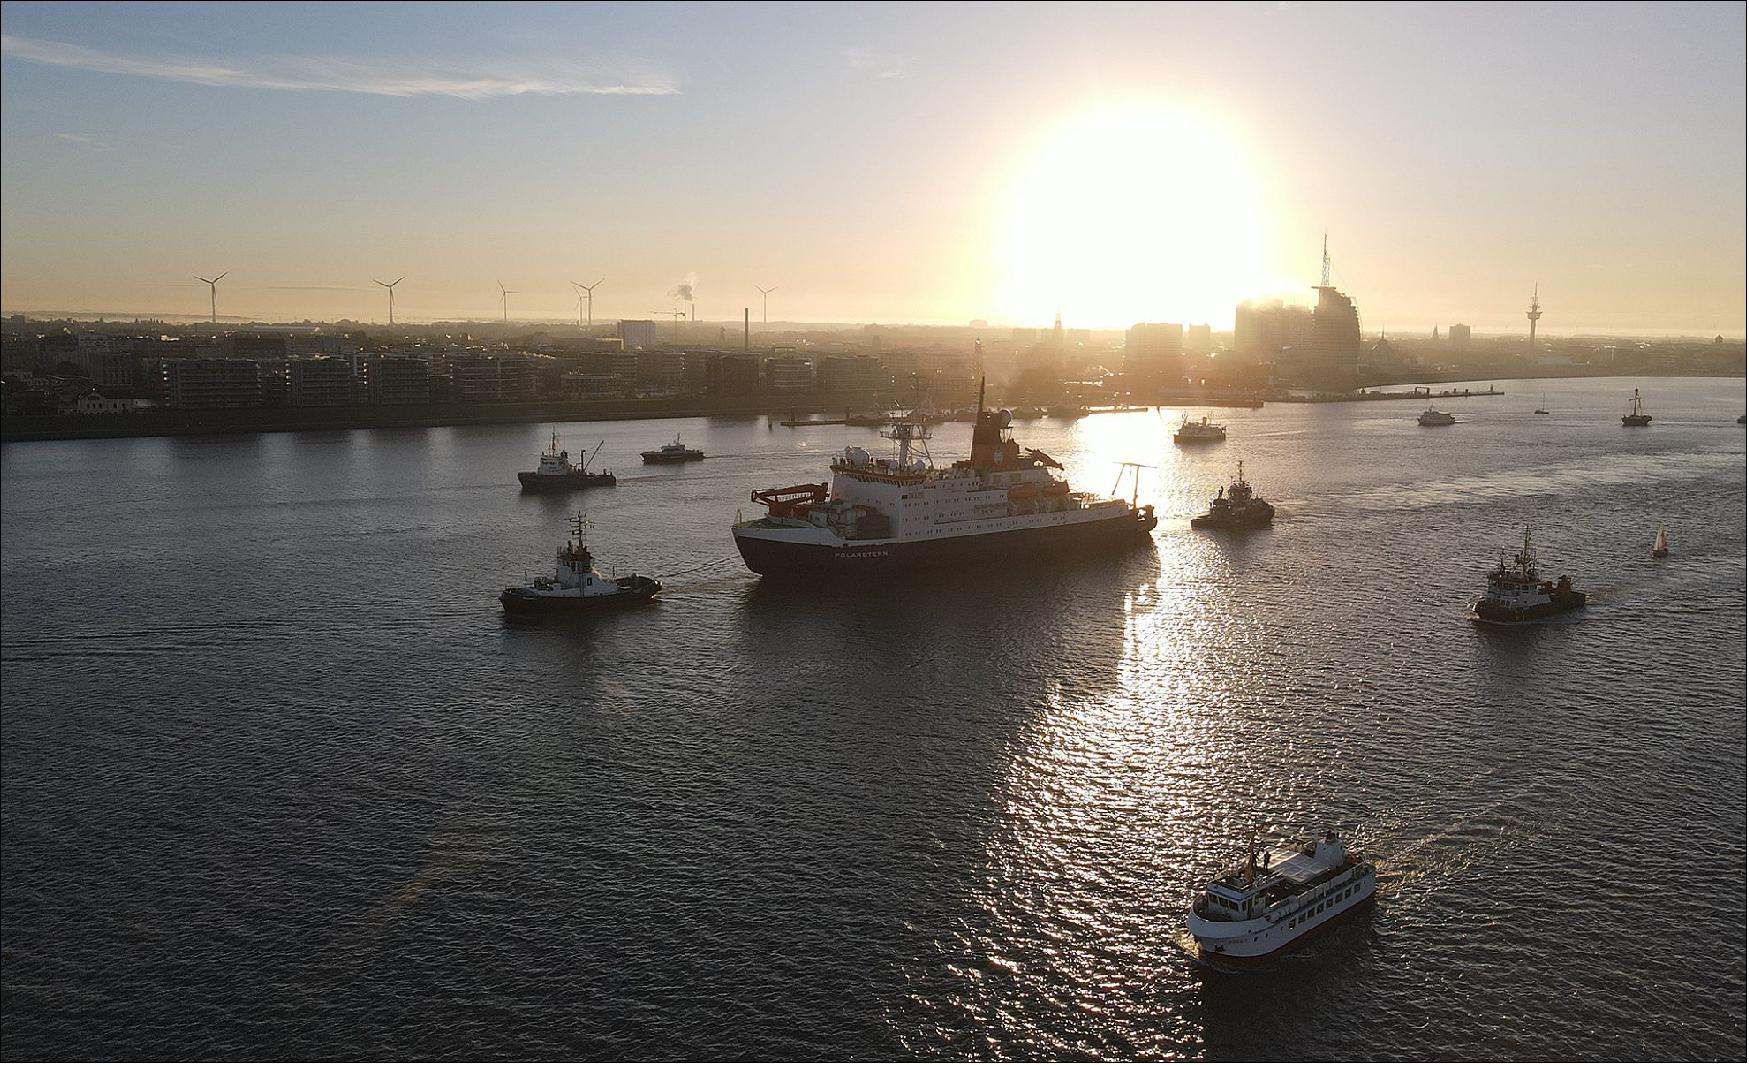 Figure 15: Accompanied by numerous ships and boats, the Polarstern arrives in Bremerhaven with the participants of the MOSAiC expedition. After 389 days in the Arctic, the biggest Arctic expedition of all time ends (image credit: Joachim Hofmann)